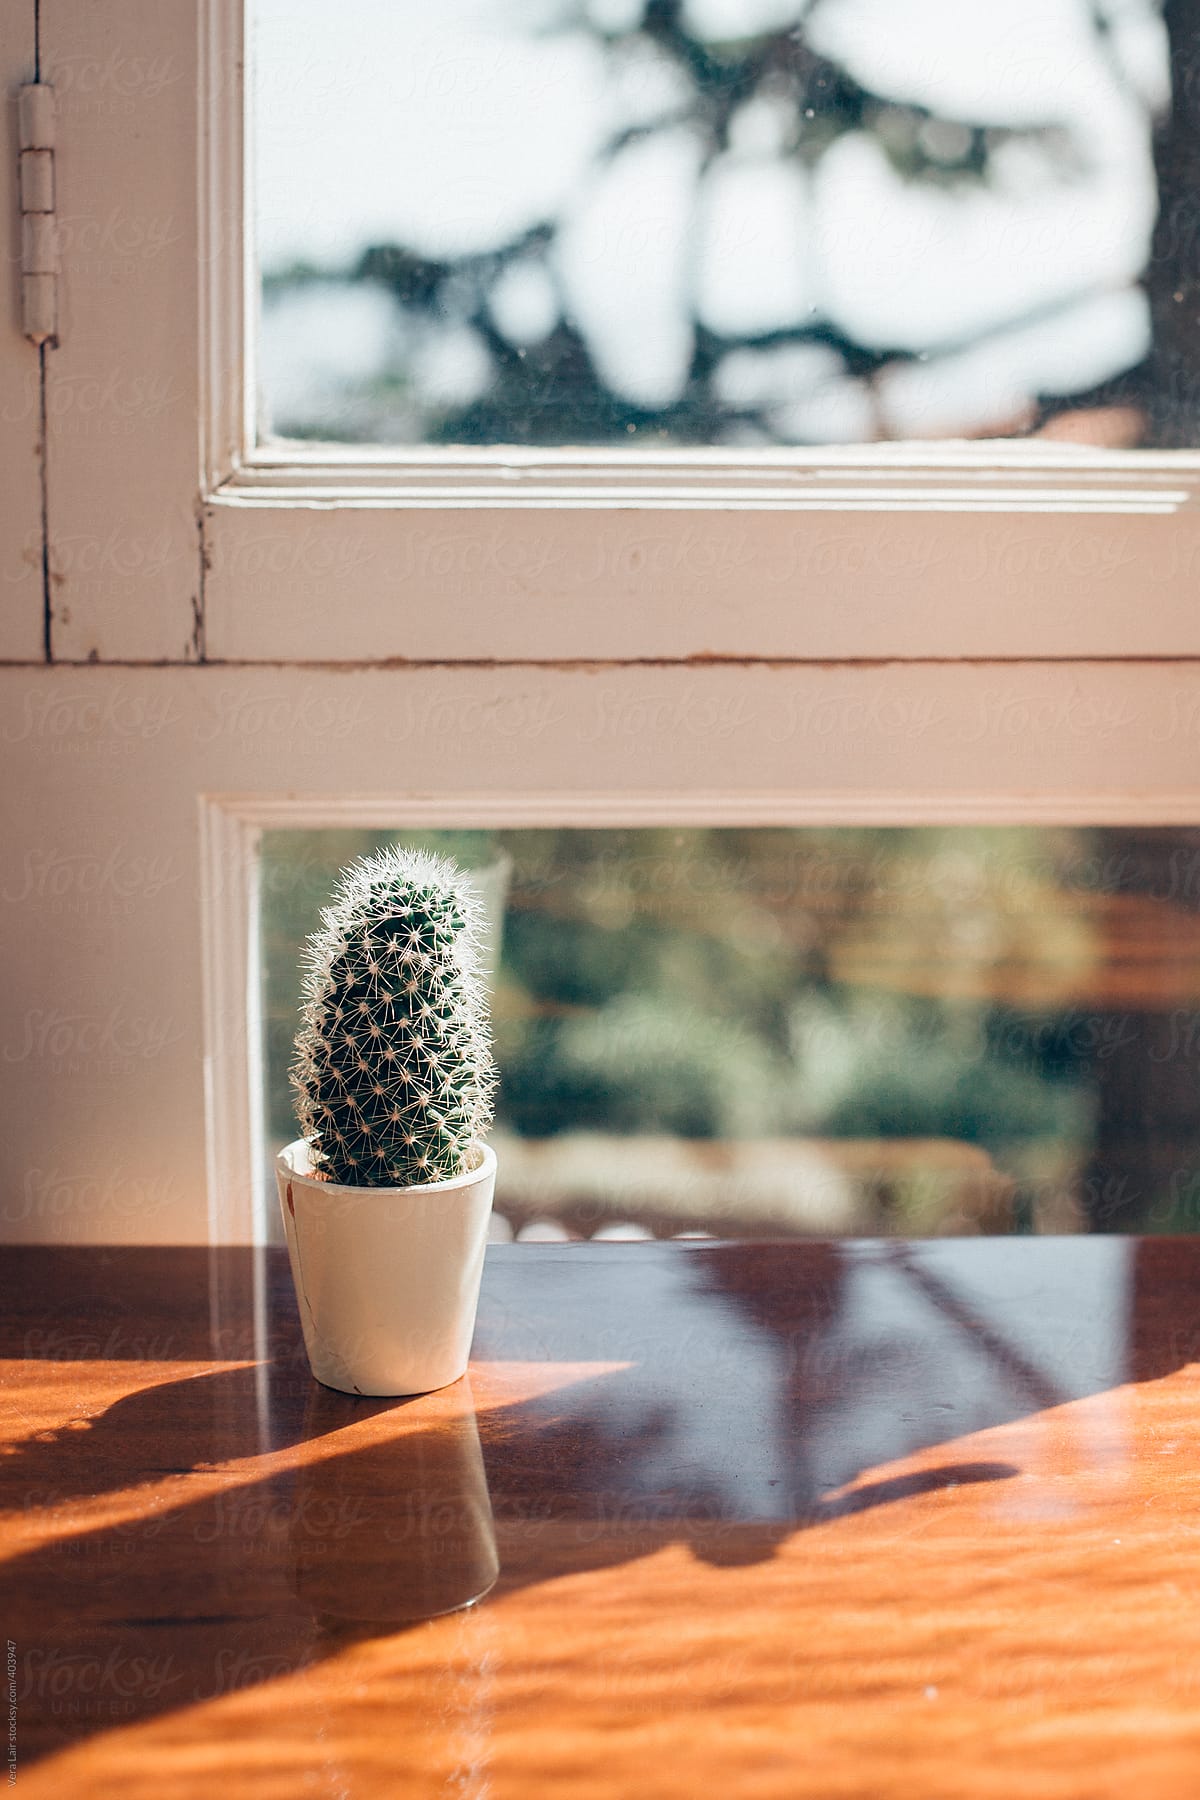 Little cactus in front a window